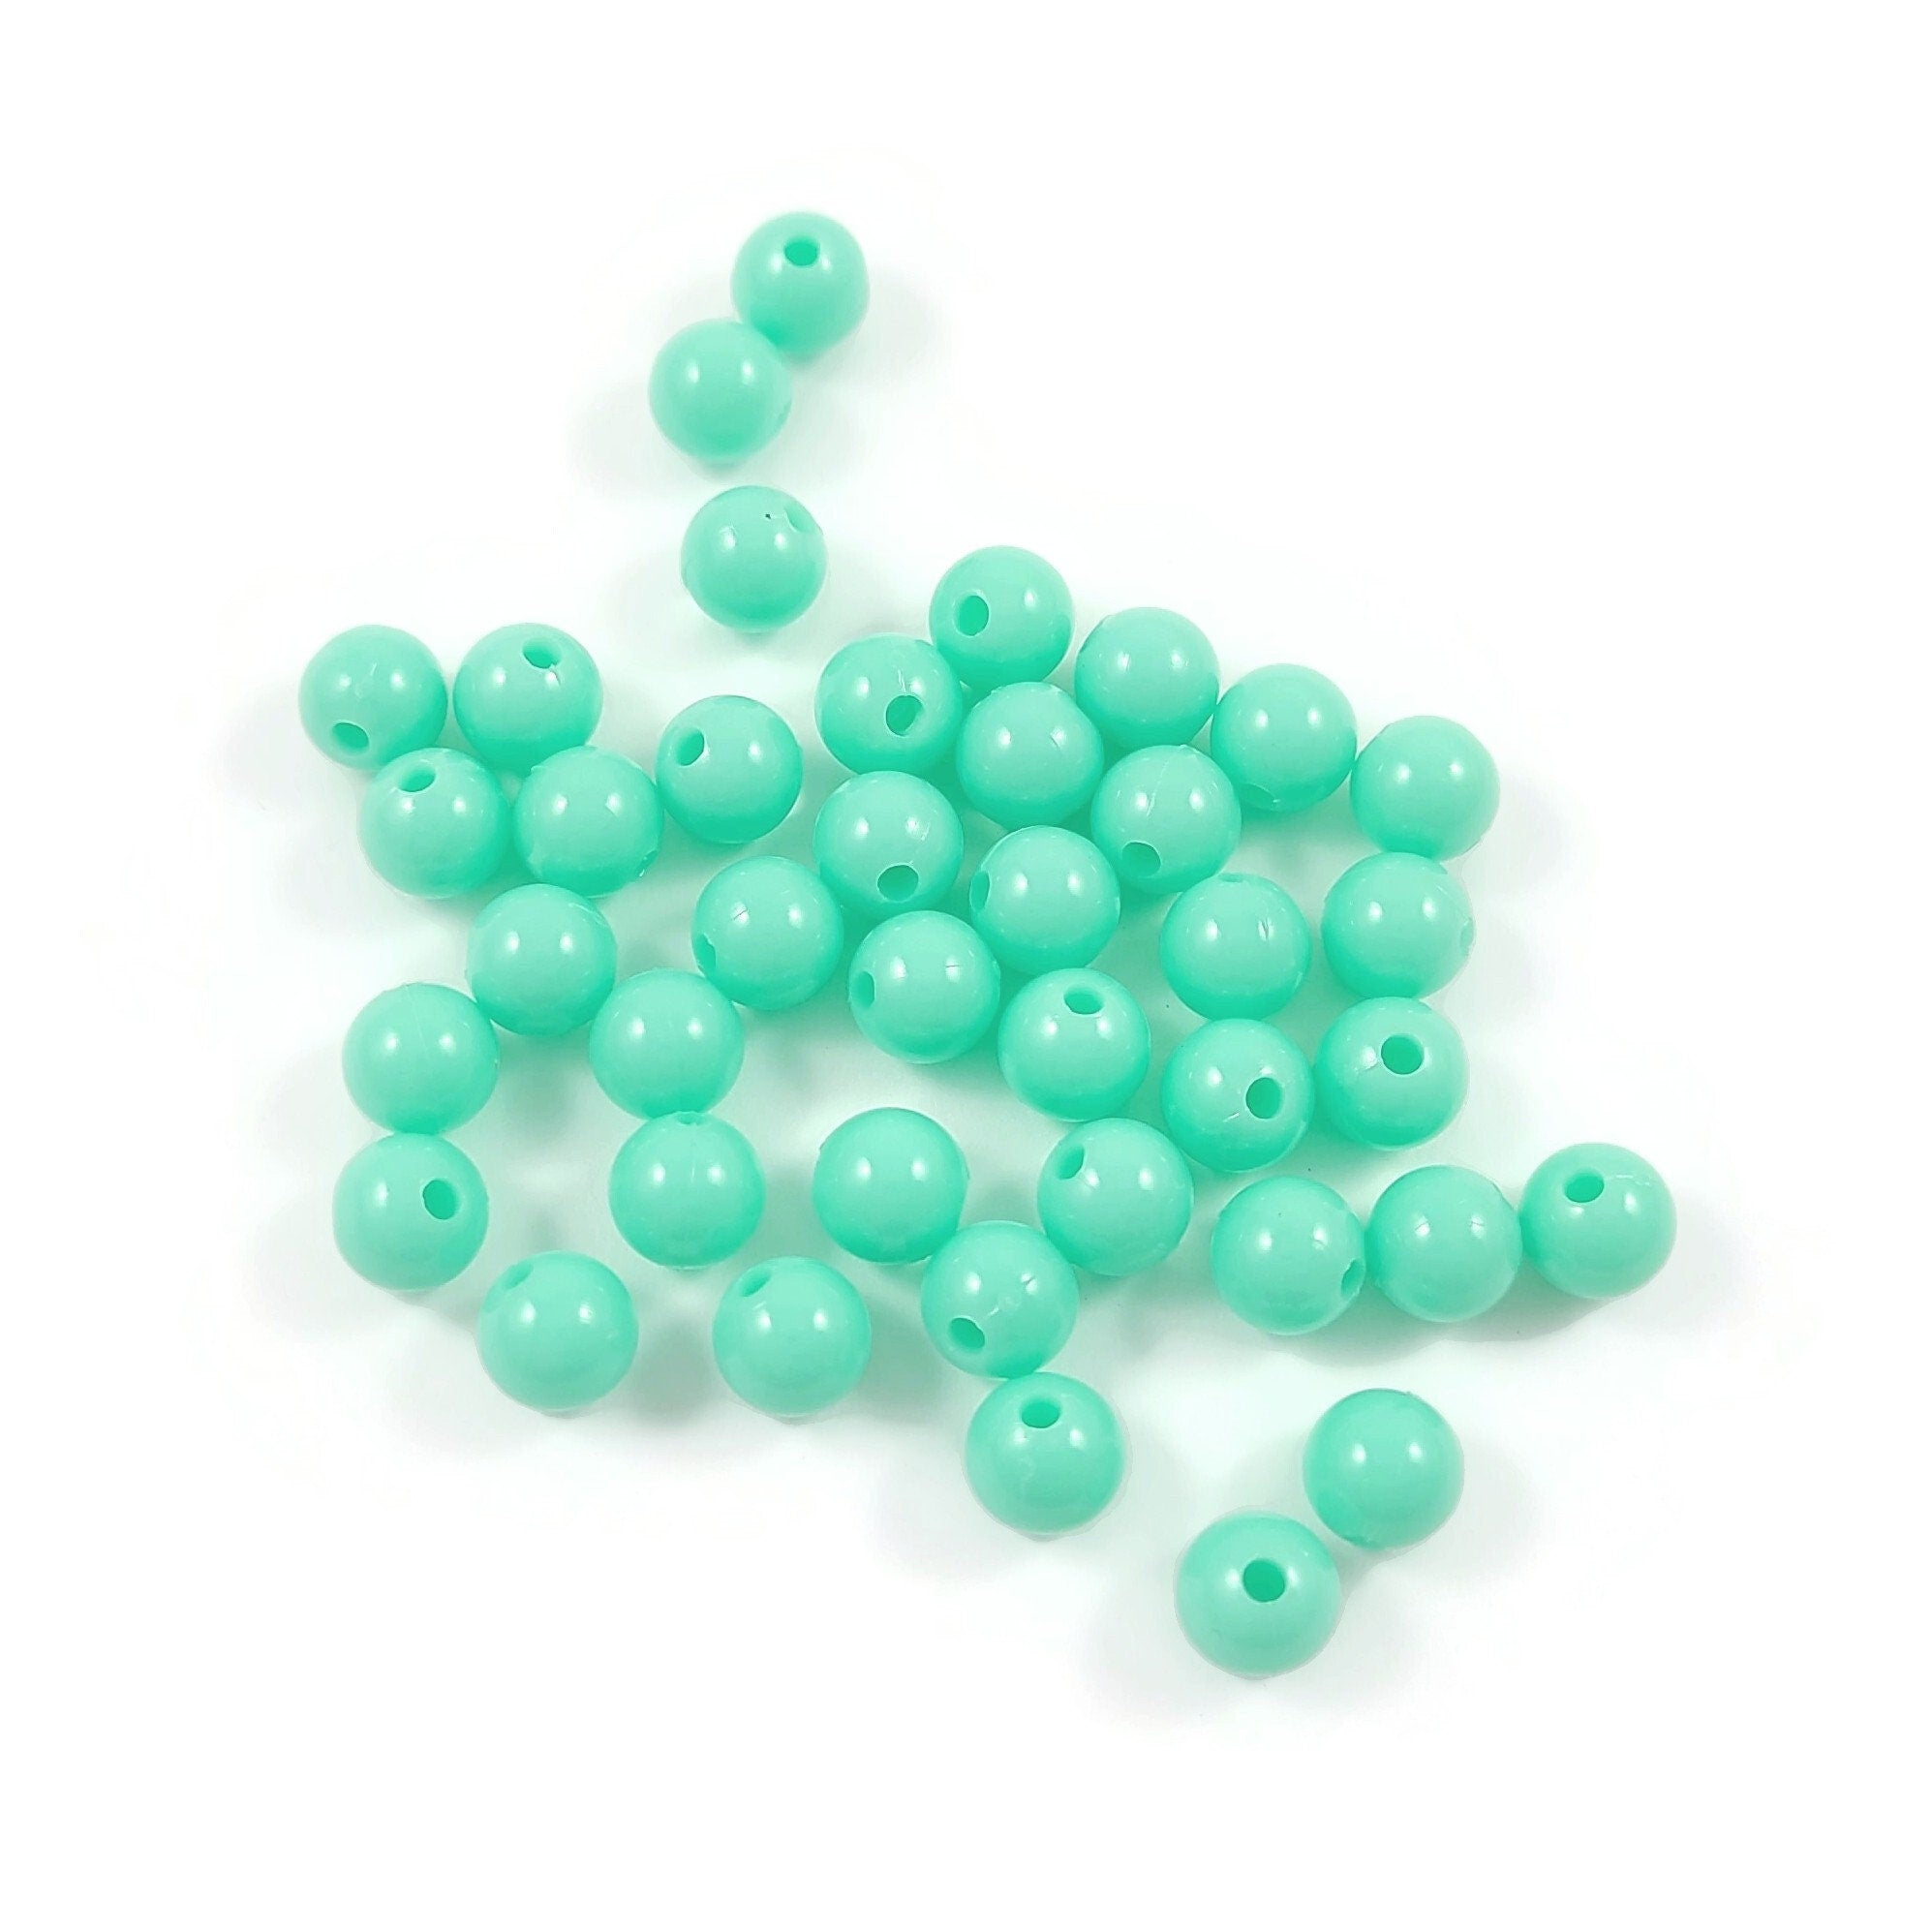 40 opaque aqua spacer beads, 6mm plastic beads for jewelry making, Turquoise round beads